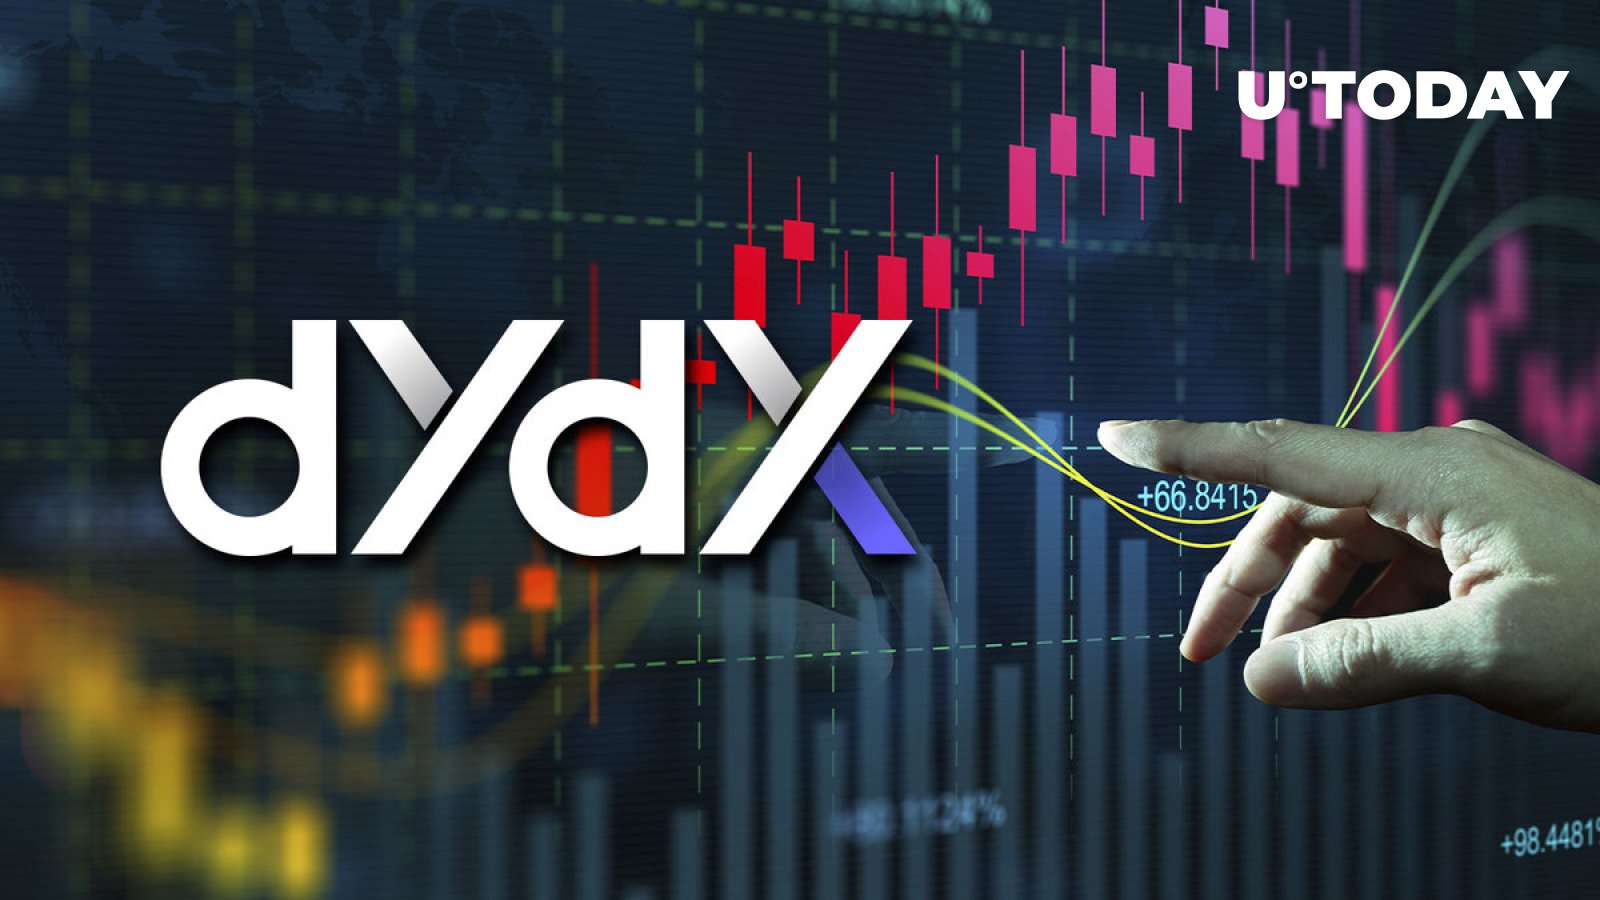 dYdX Price Spikes 35% After FTX Crash, Here’s Who Benefited Most